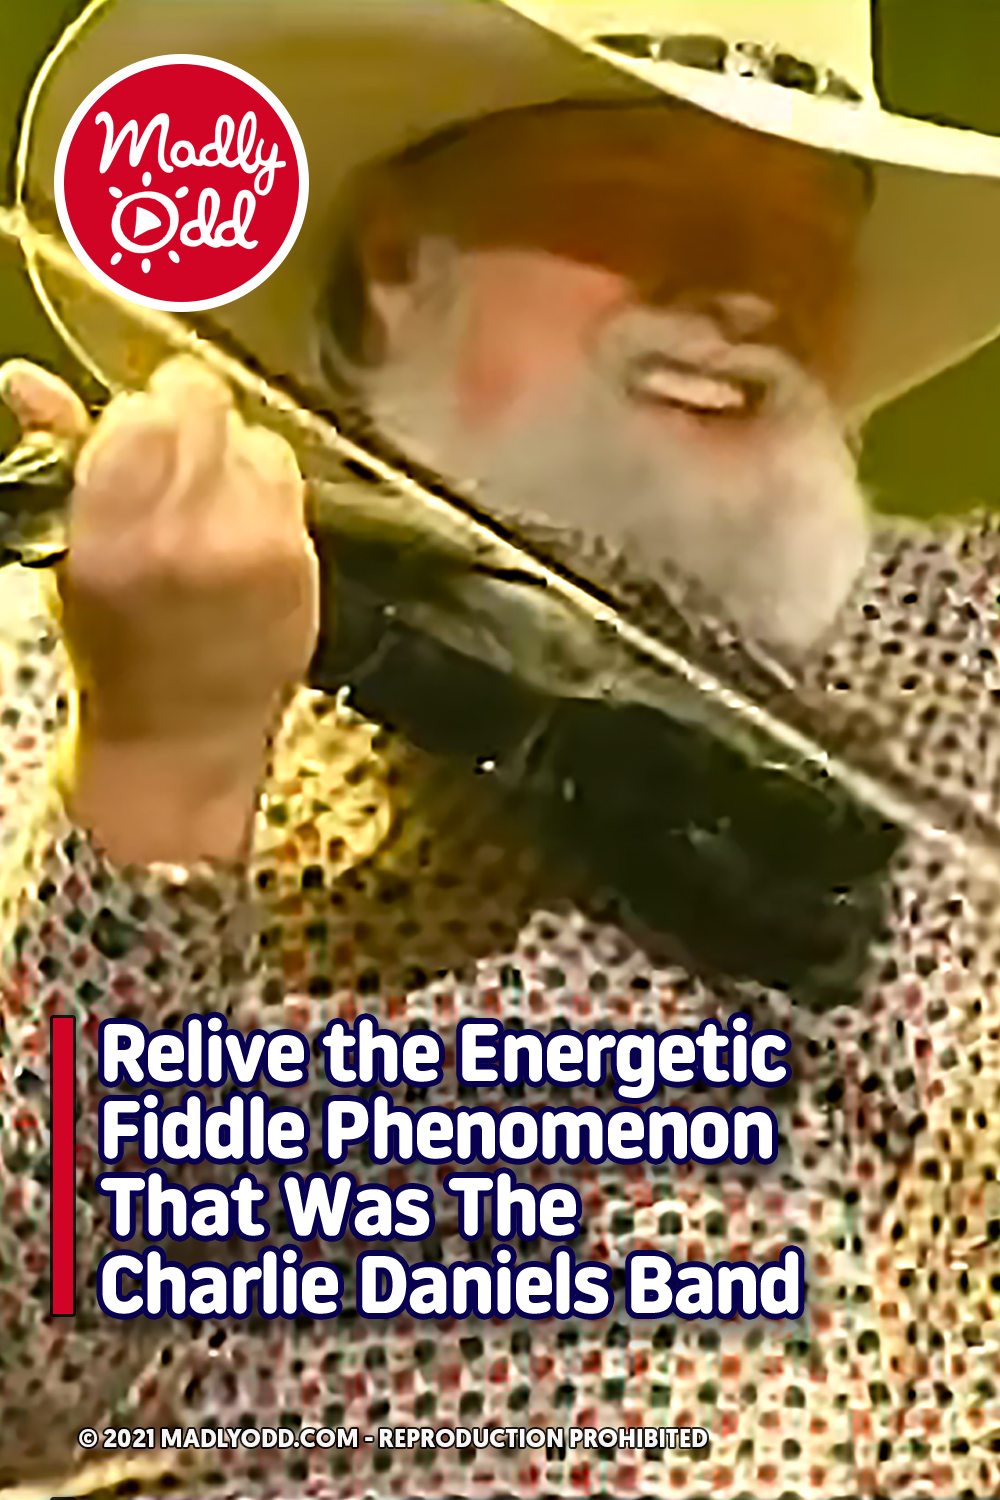 Relive the Energetic Fiddle Phenomenon That Was The Charlie Daniels Band